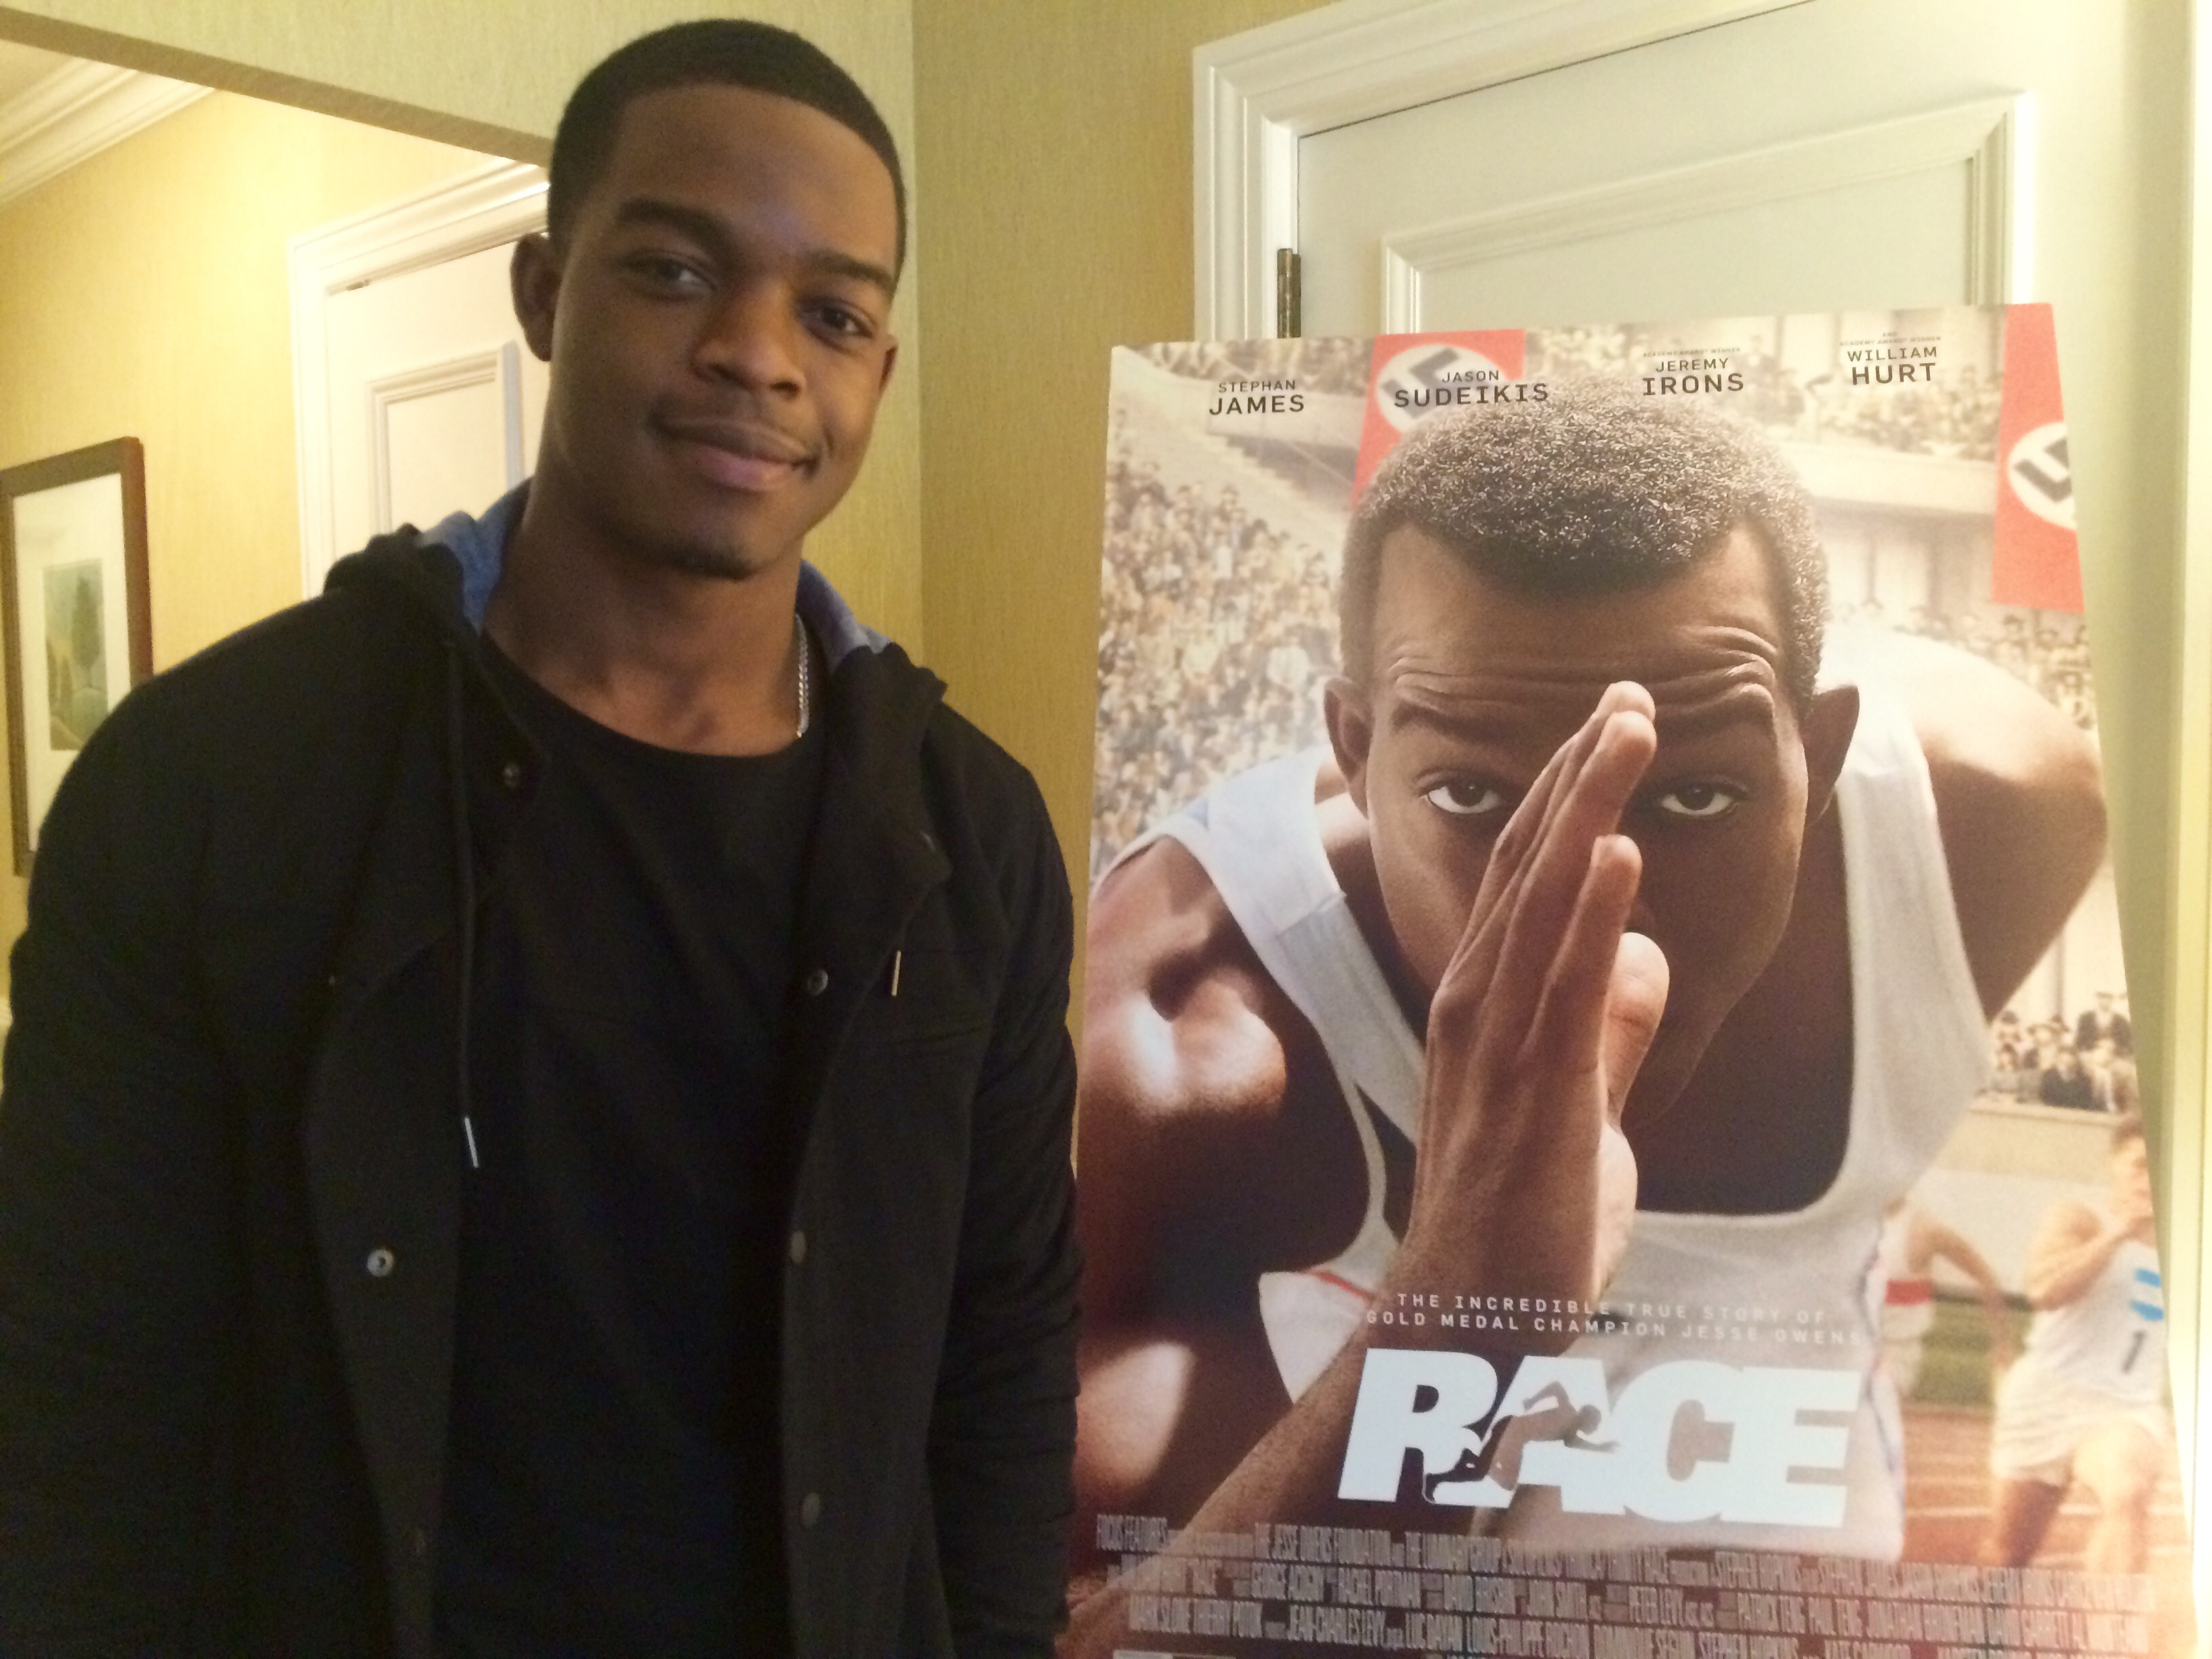 Actor Stephan James poses next to a poster of "Race" during a visit to Dupont Circle in D.C. (WTOP/Jason Fraley)